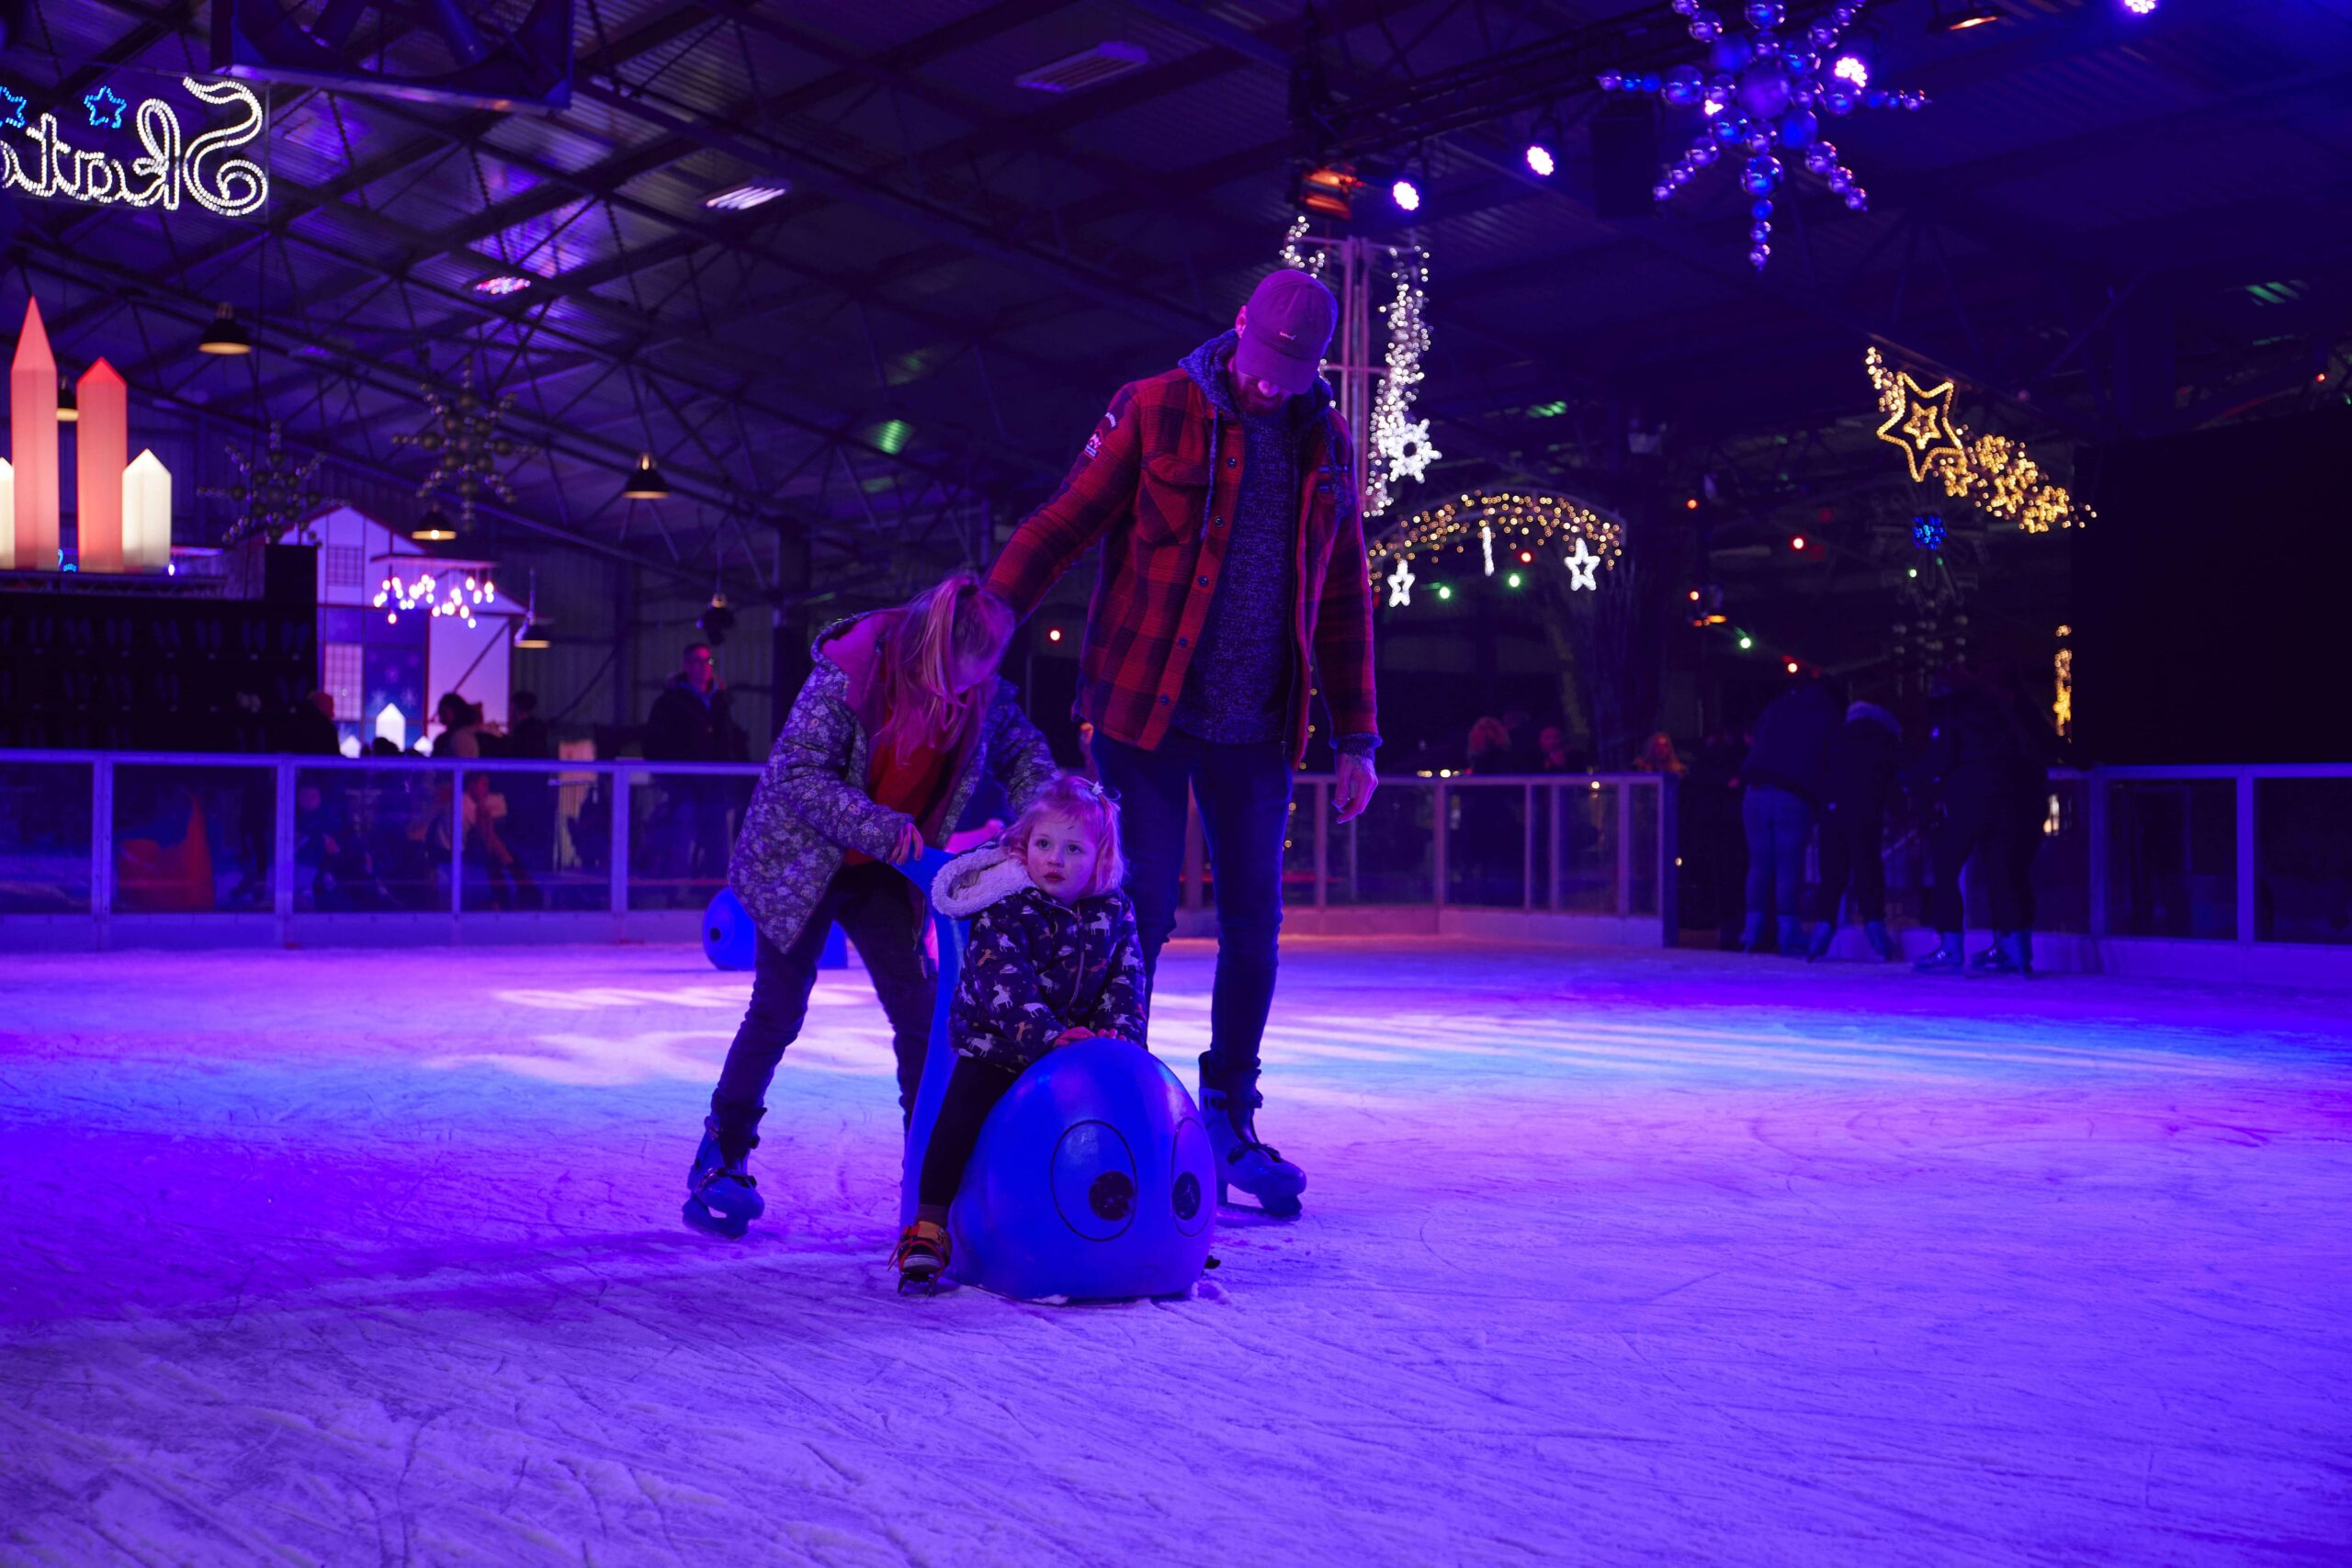 an adult and child ice skating